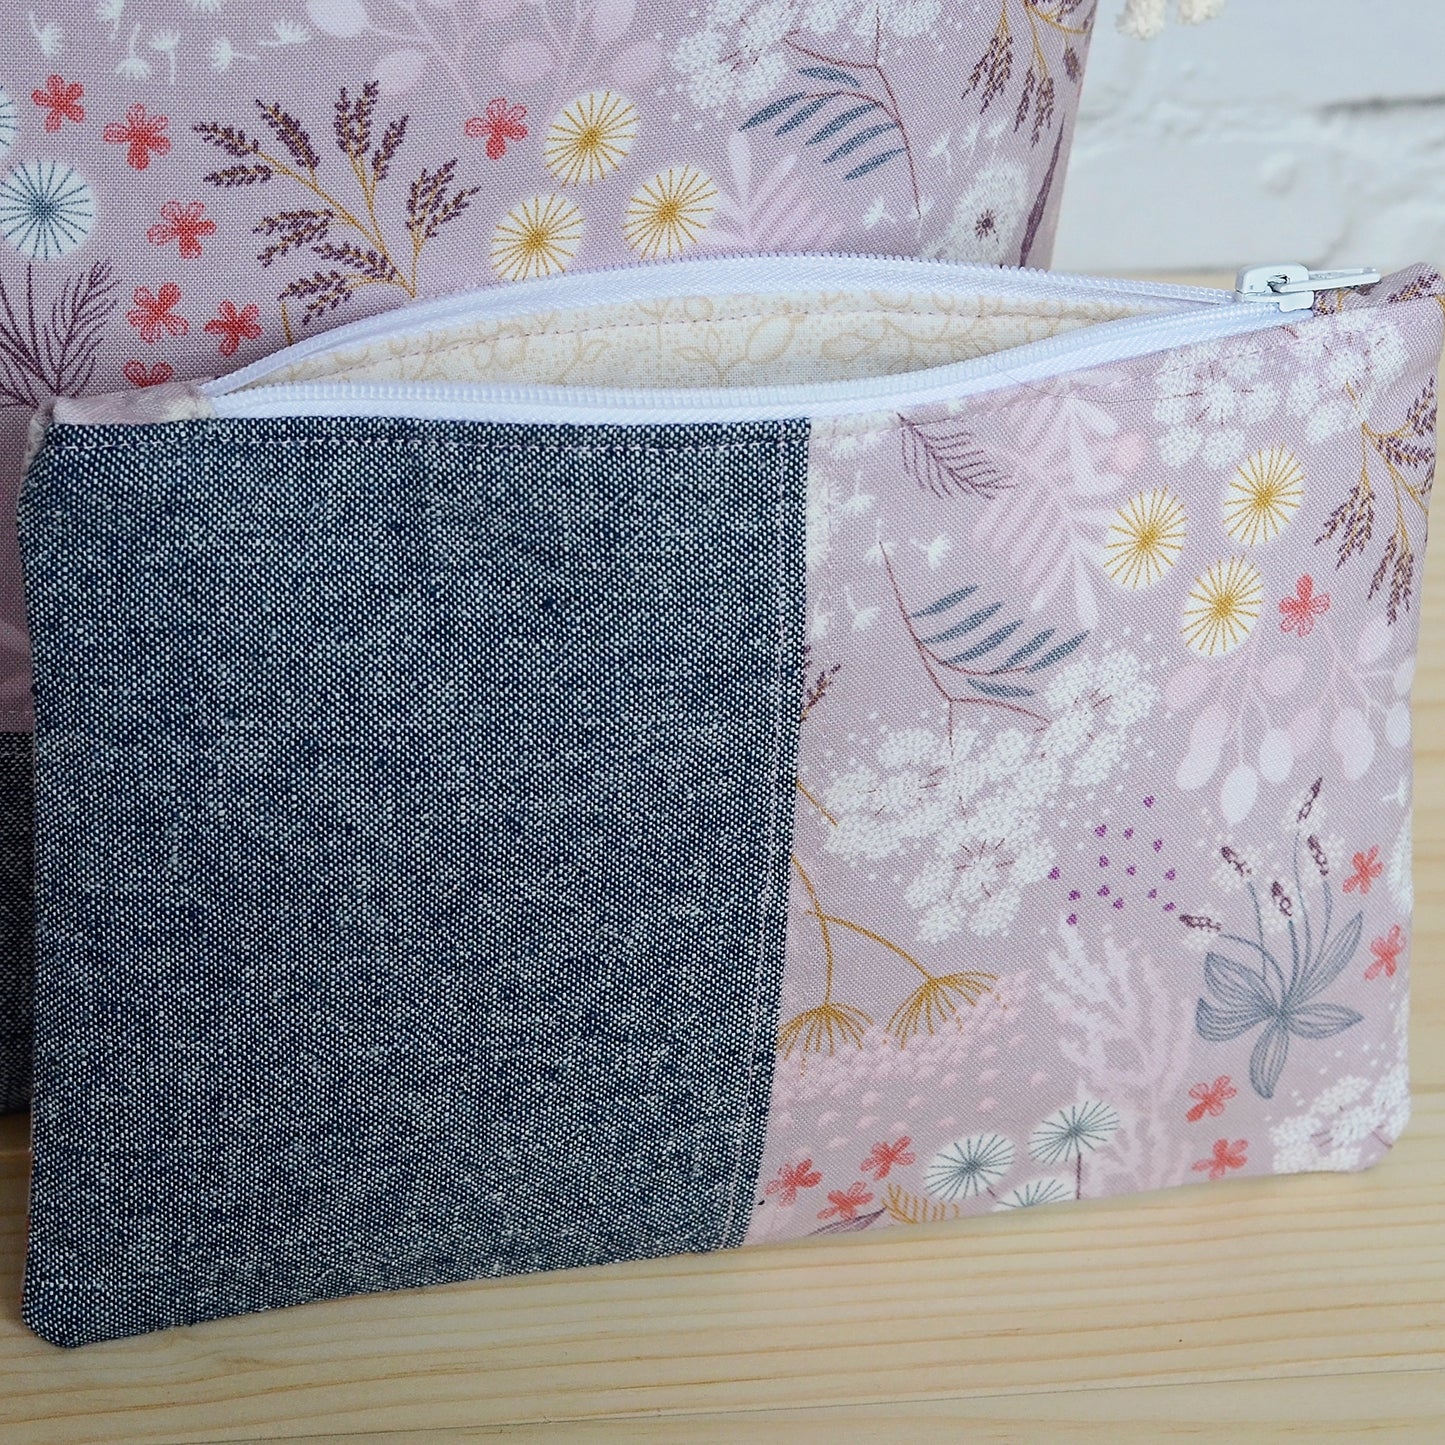 Mauve floral and indigo linen knitting pouch.